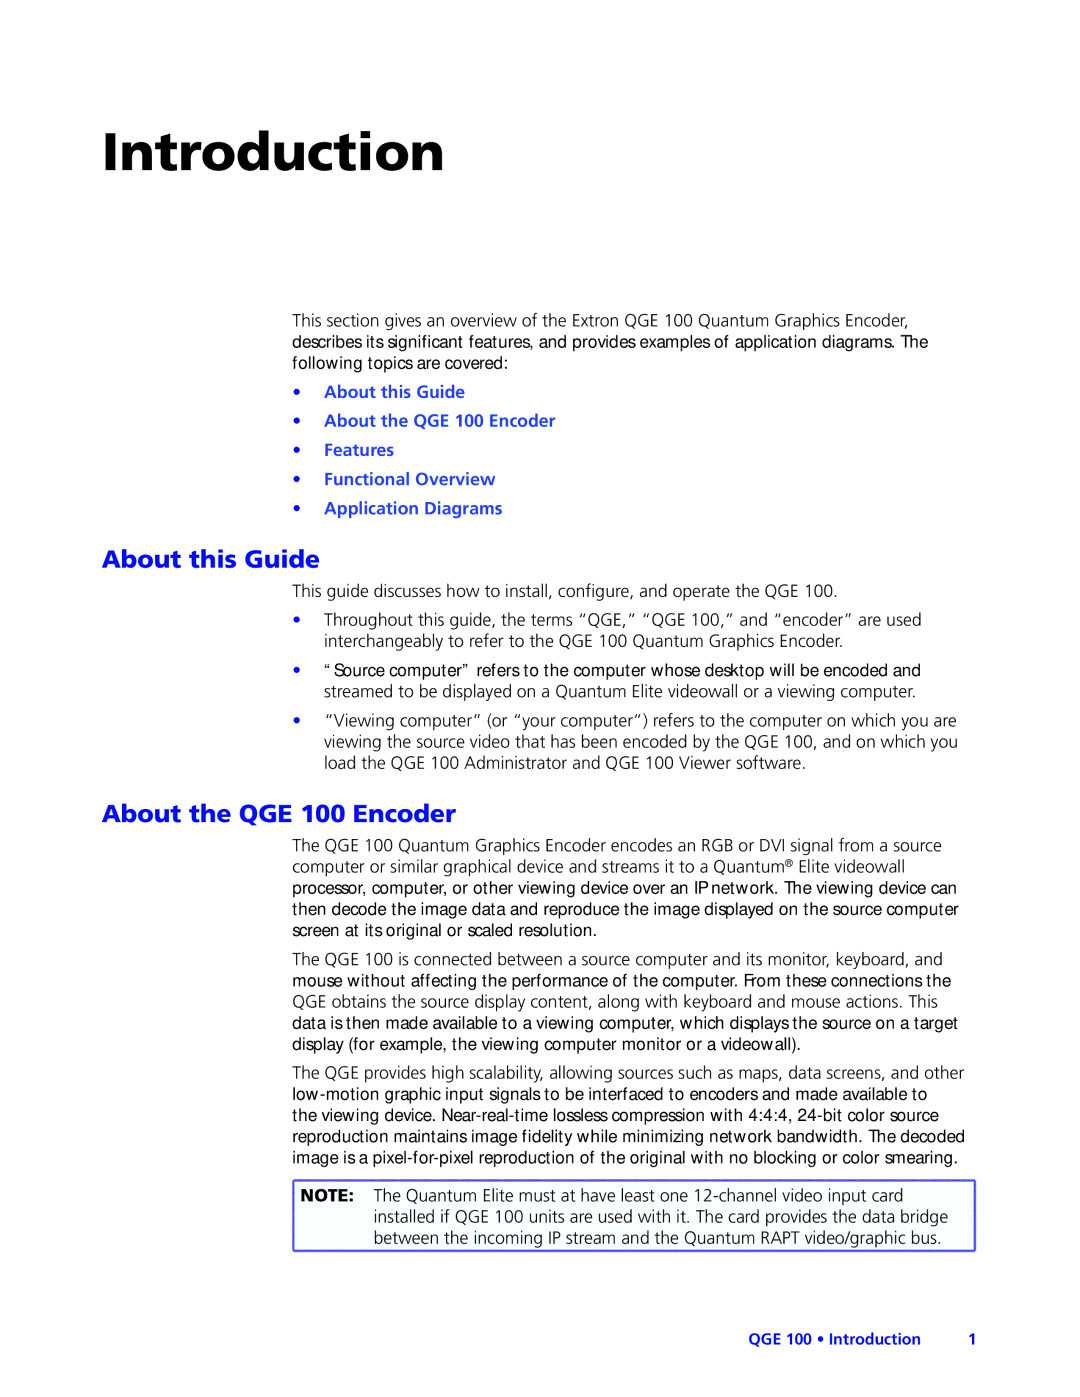 Extron electronic manual About this Guide, About the QGE 100 Encoder 